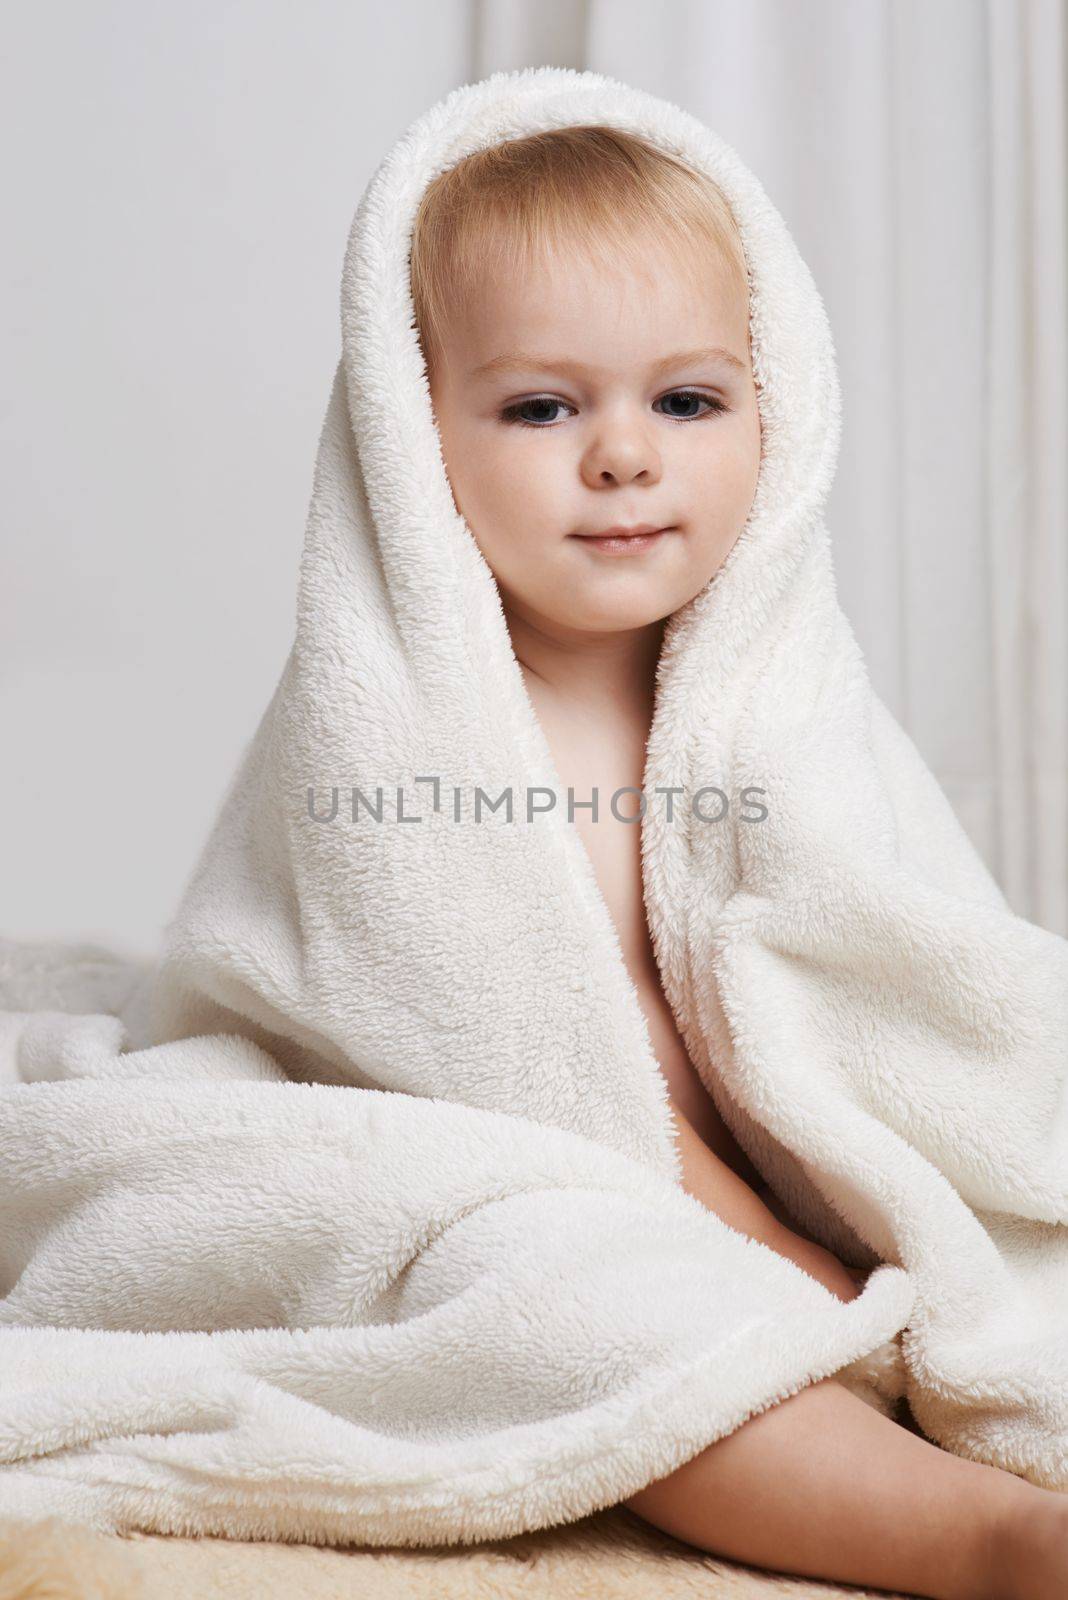 Hes a little angel. An adorable baby boy wrapped in a fluffy blanket. by YuriArcurs